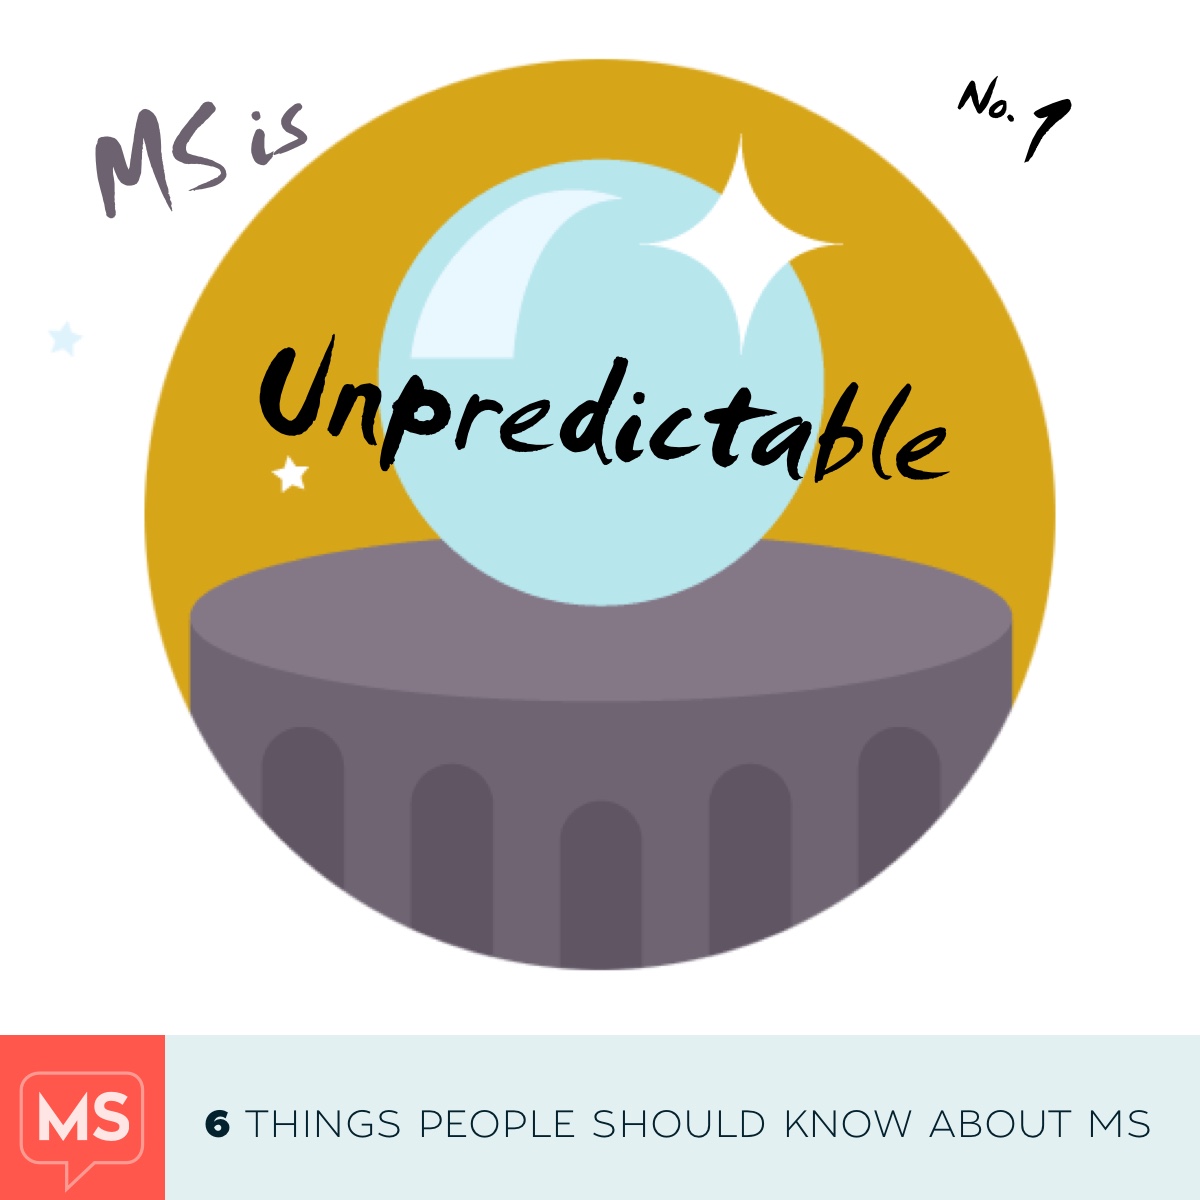 Six things people should know about MS